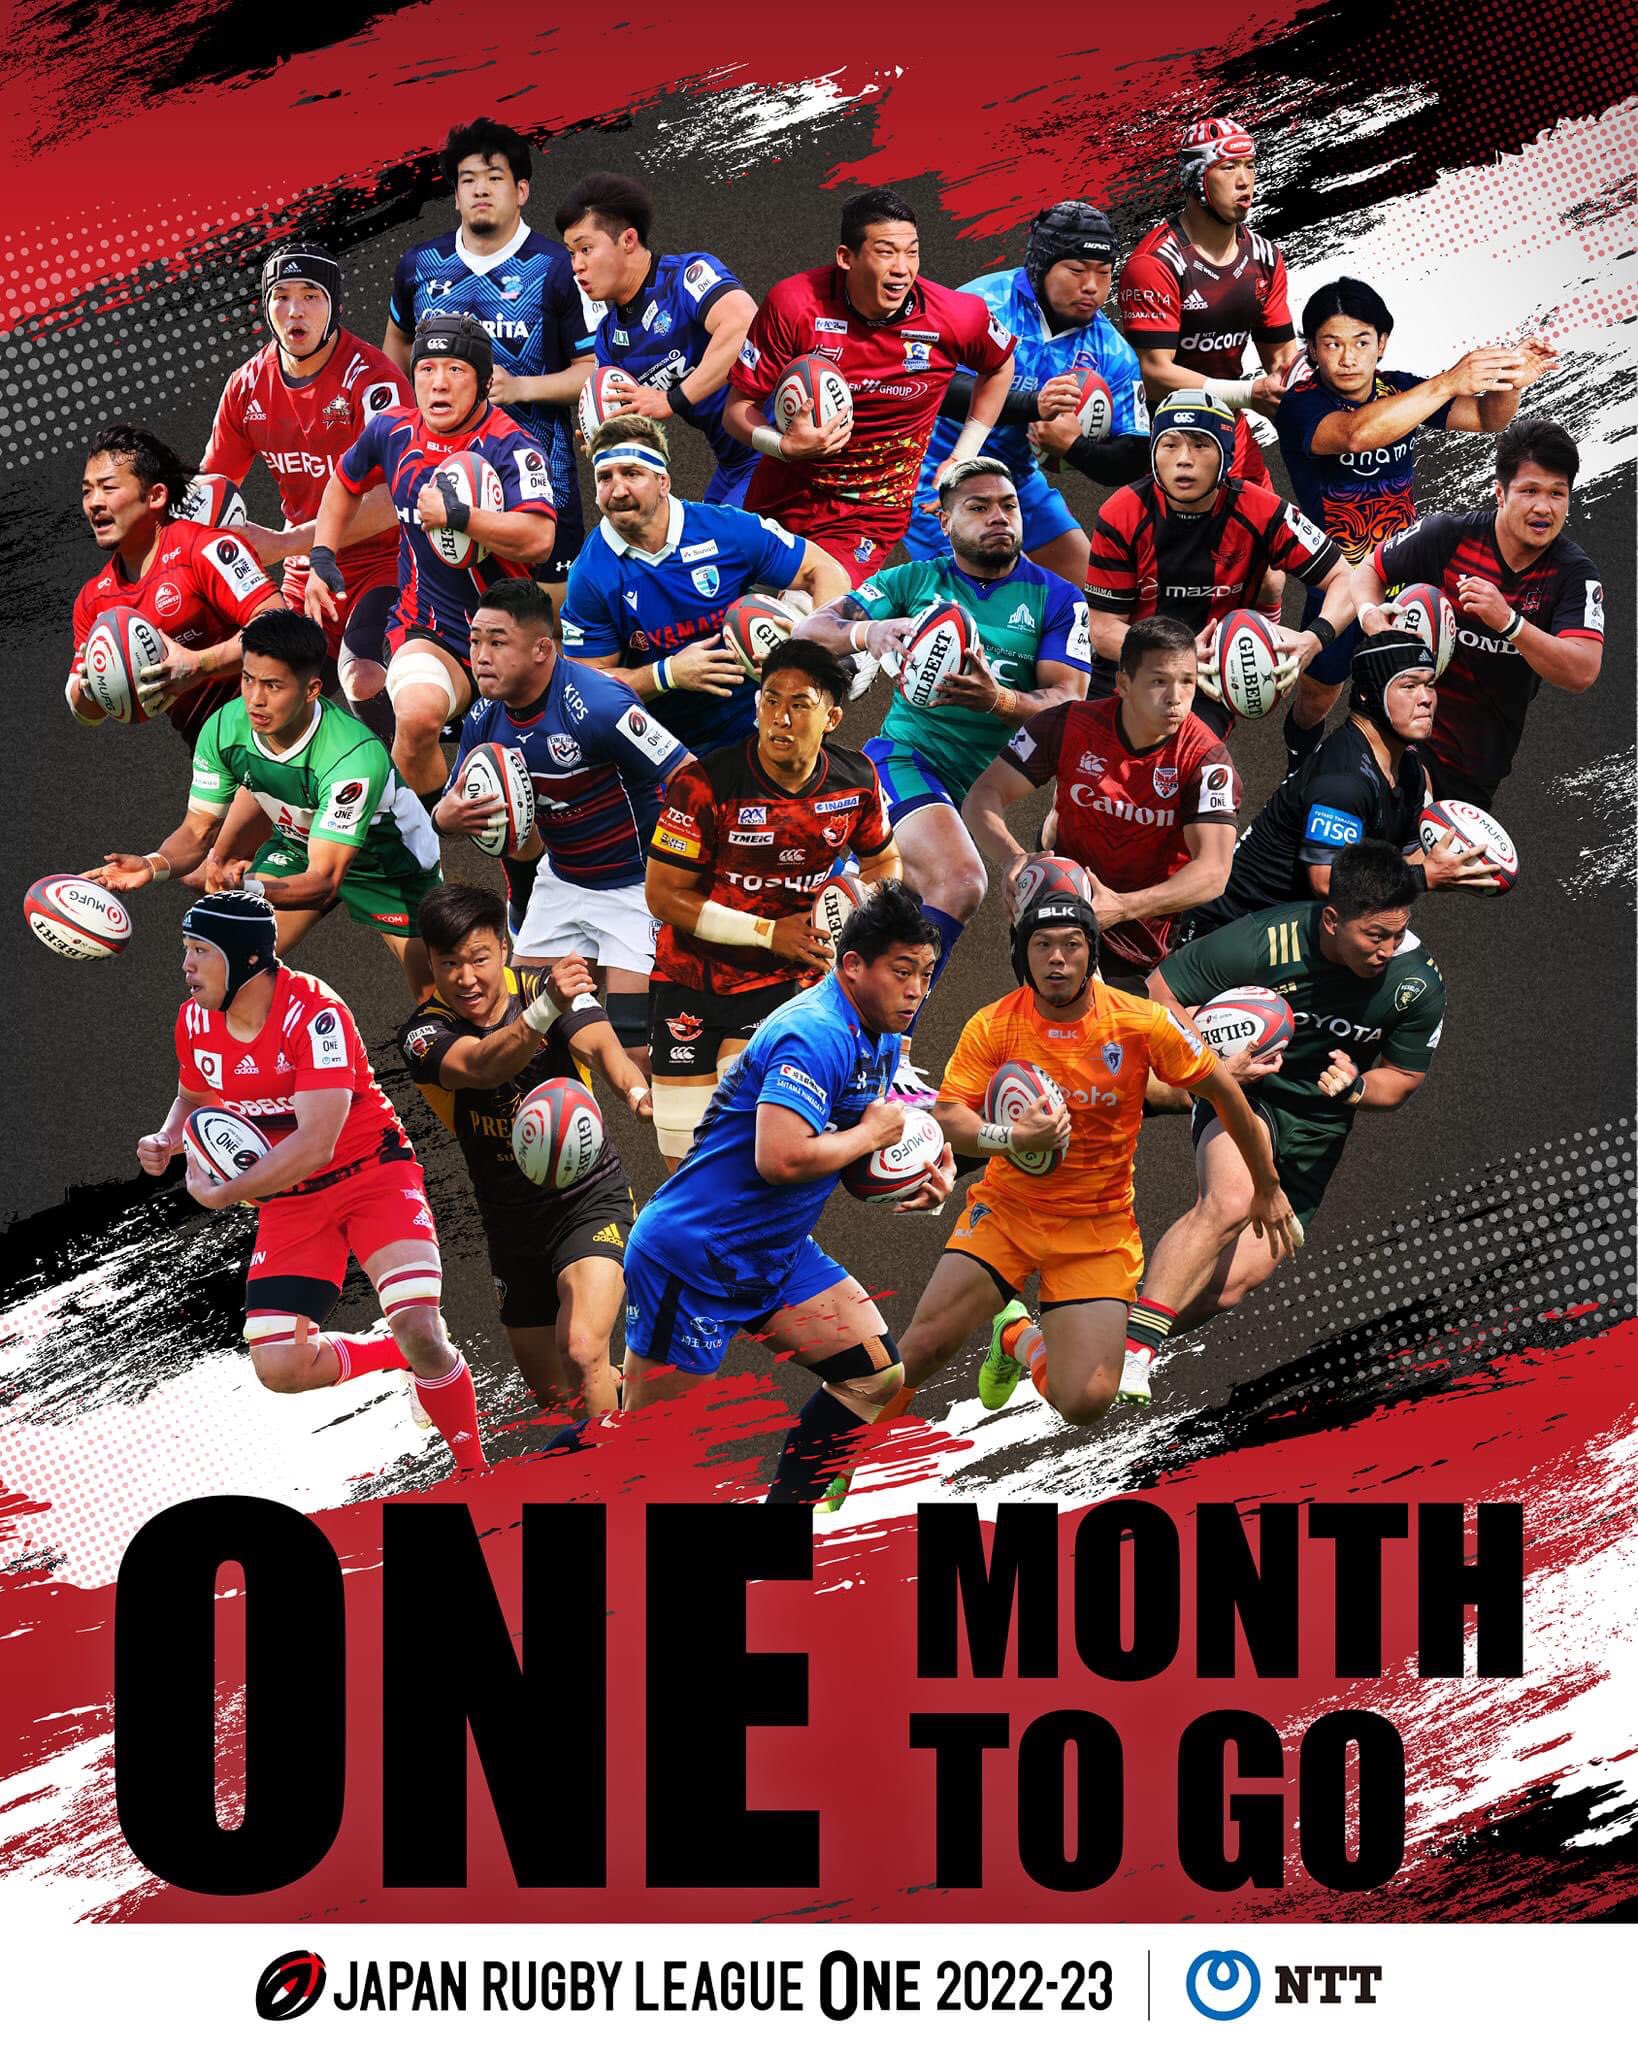 number24 1x12 You Can Do It! Japan Rugby!!! - Trakt